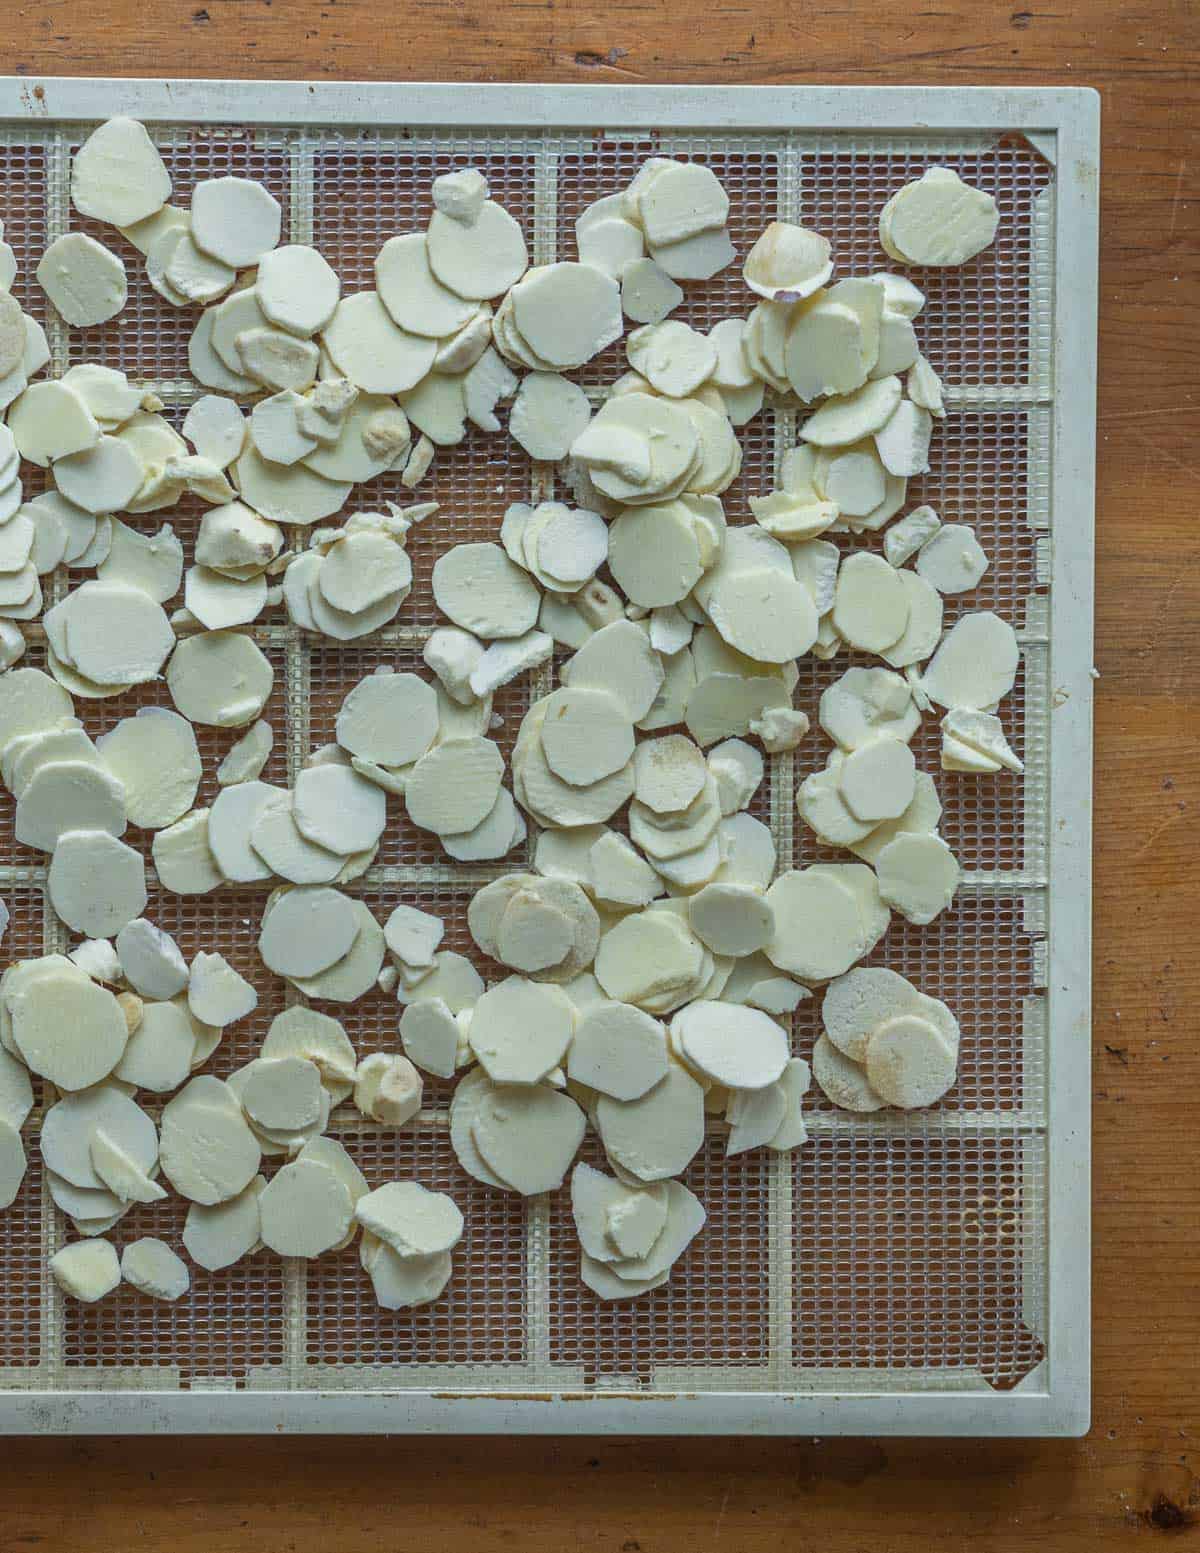 Laying sliced katniss potatoes on a dehydrating tray. 